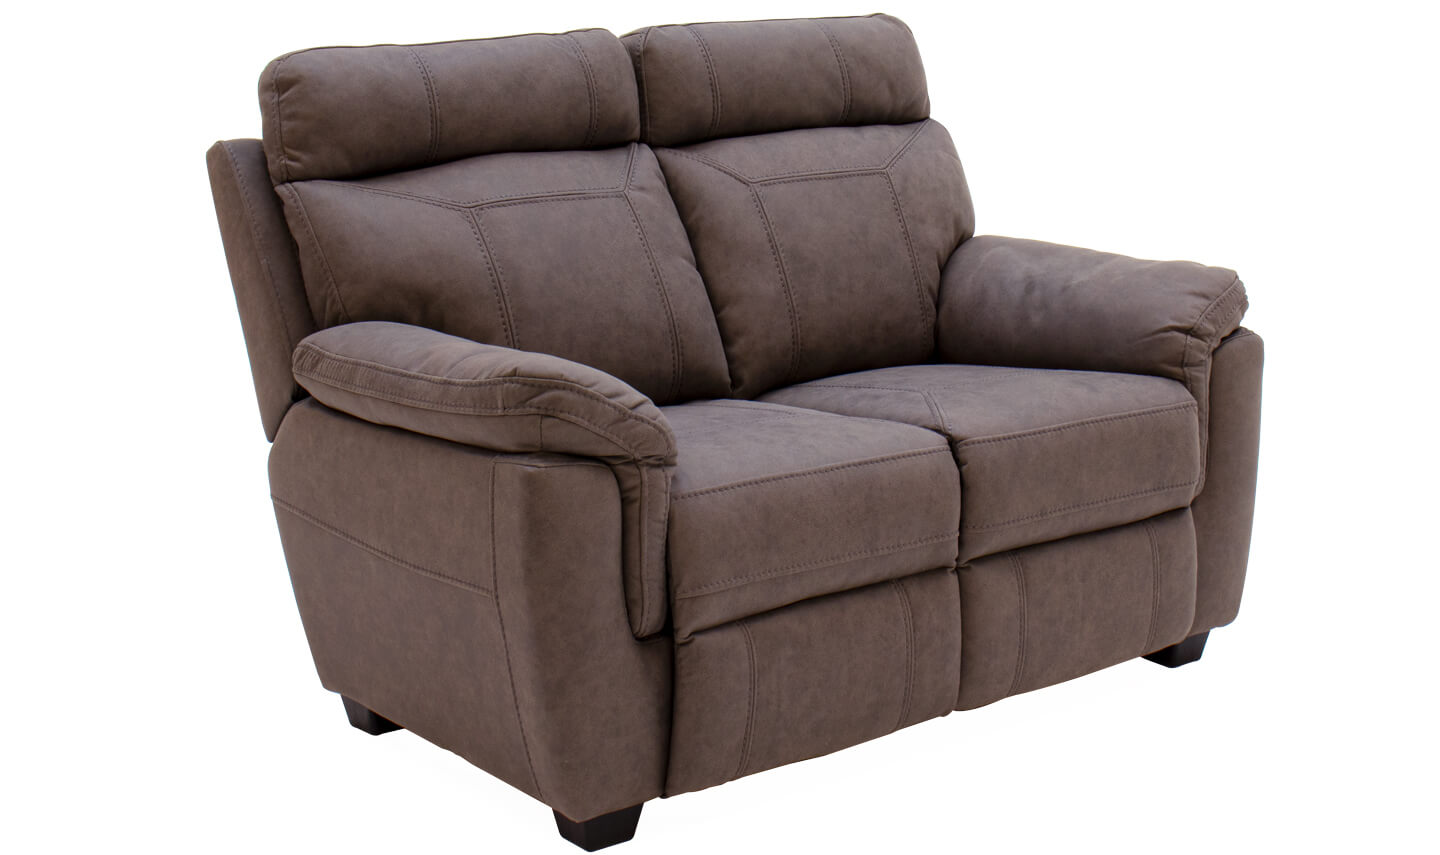 Baxter-2-Seater-Fixed-Brown-Angle